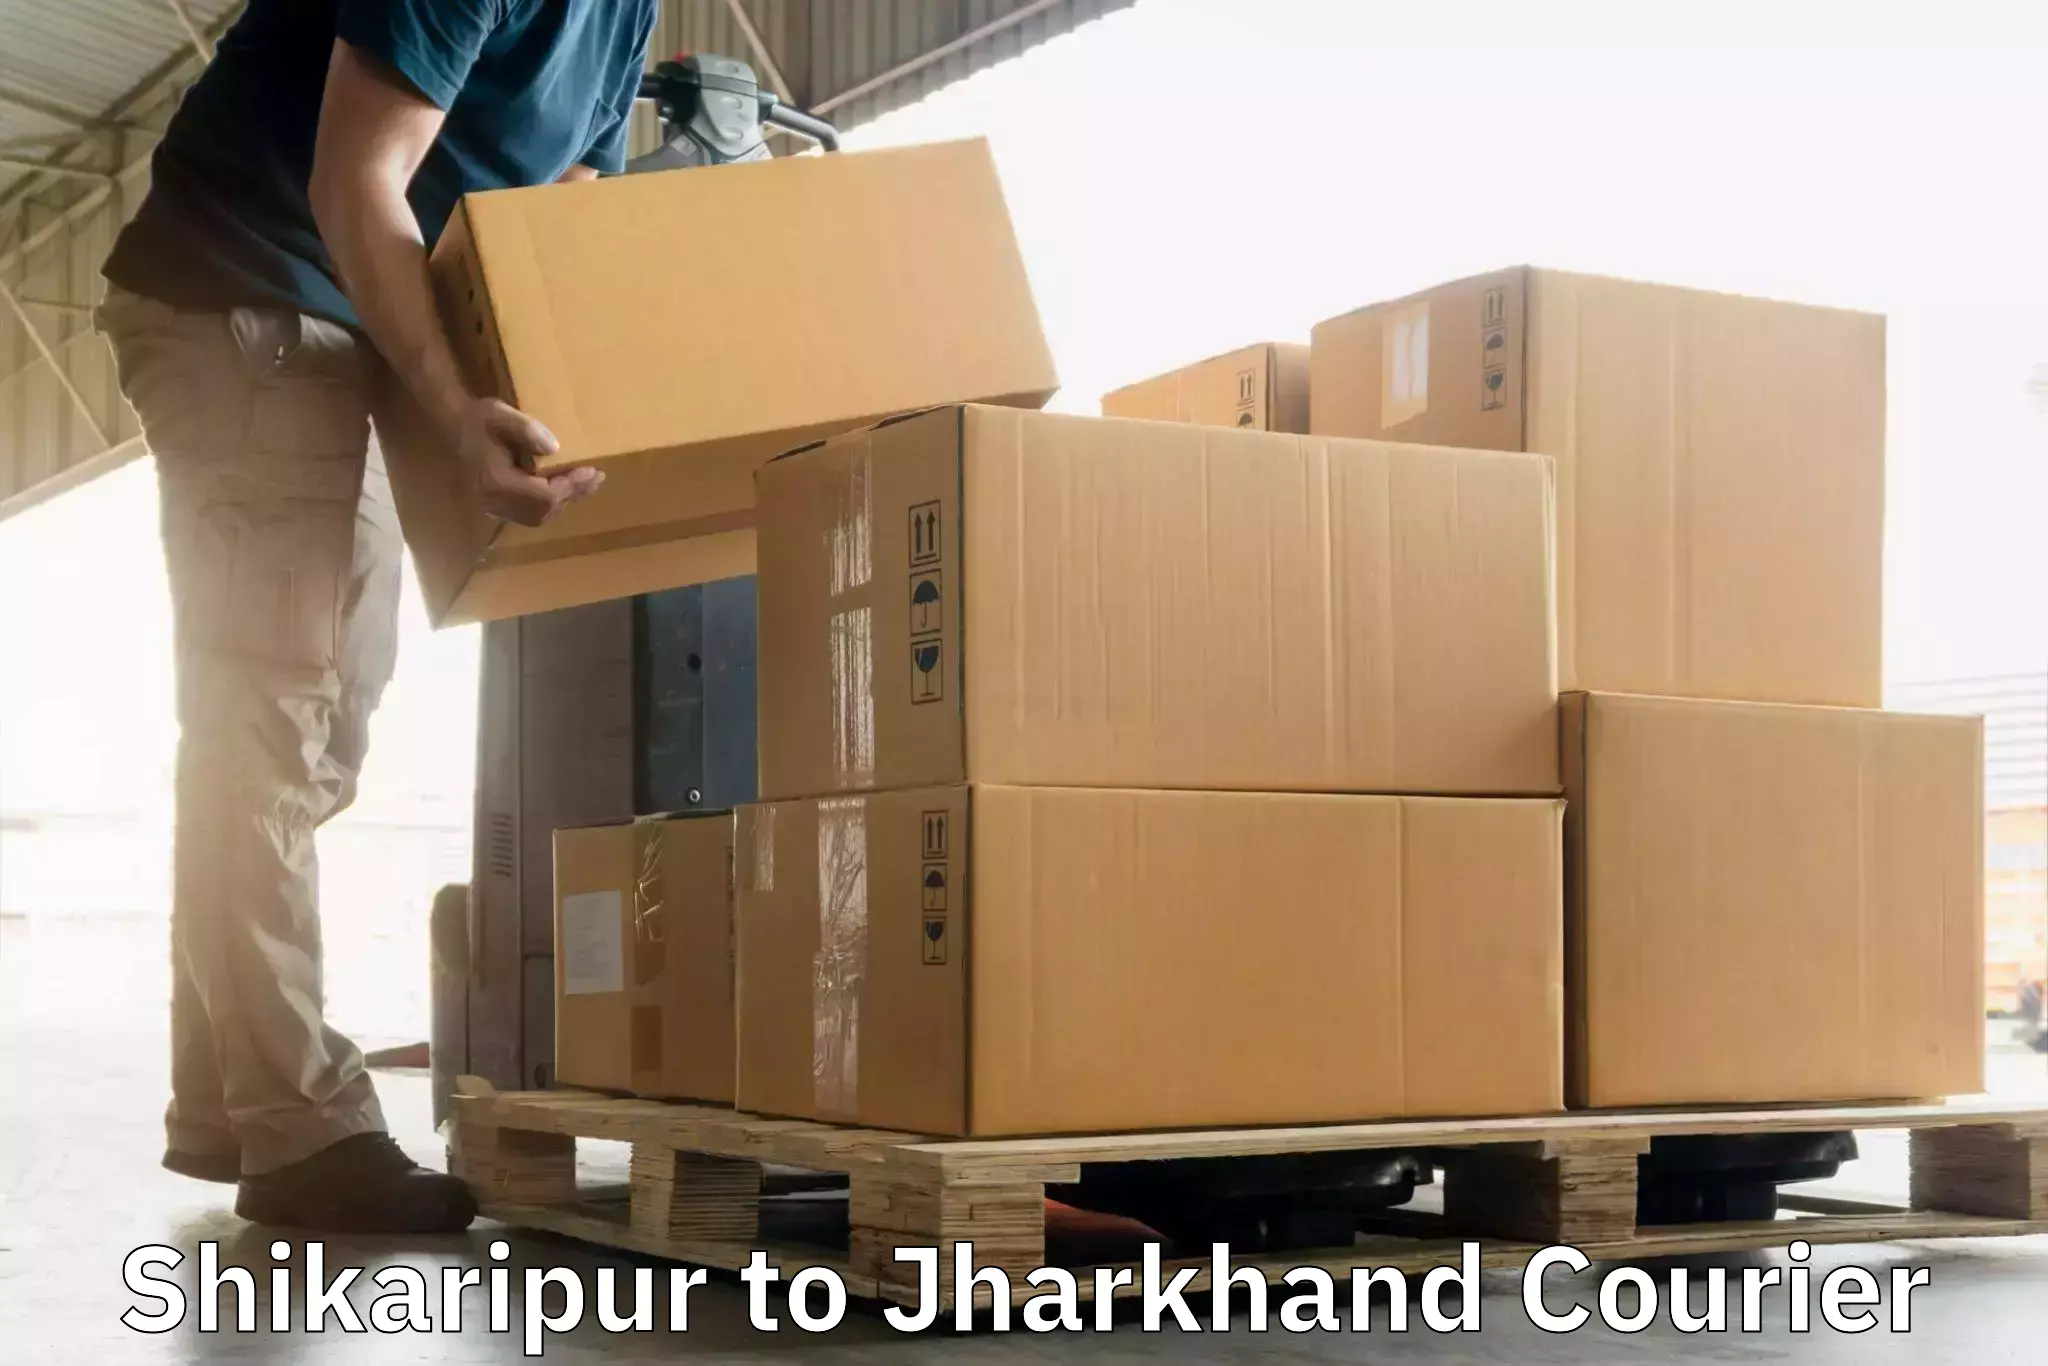 Flexible delivery schedules Shikaripur to Padma Hazaribagh